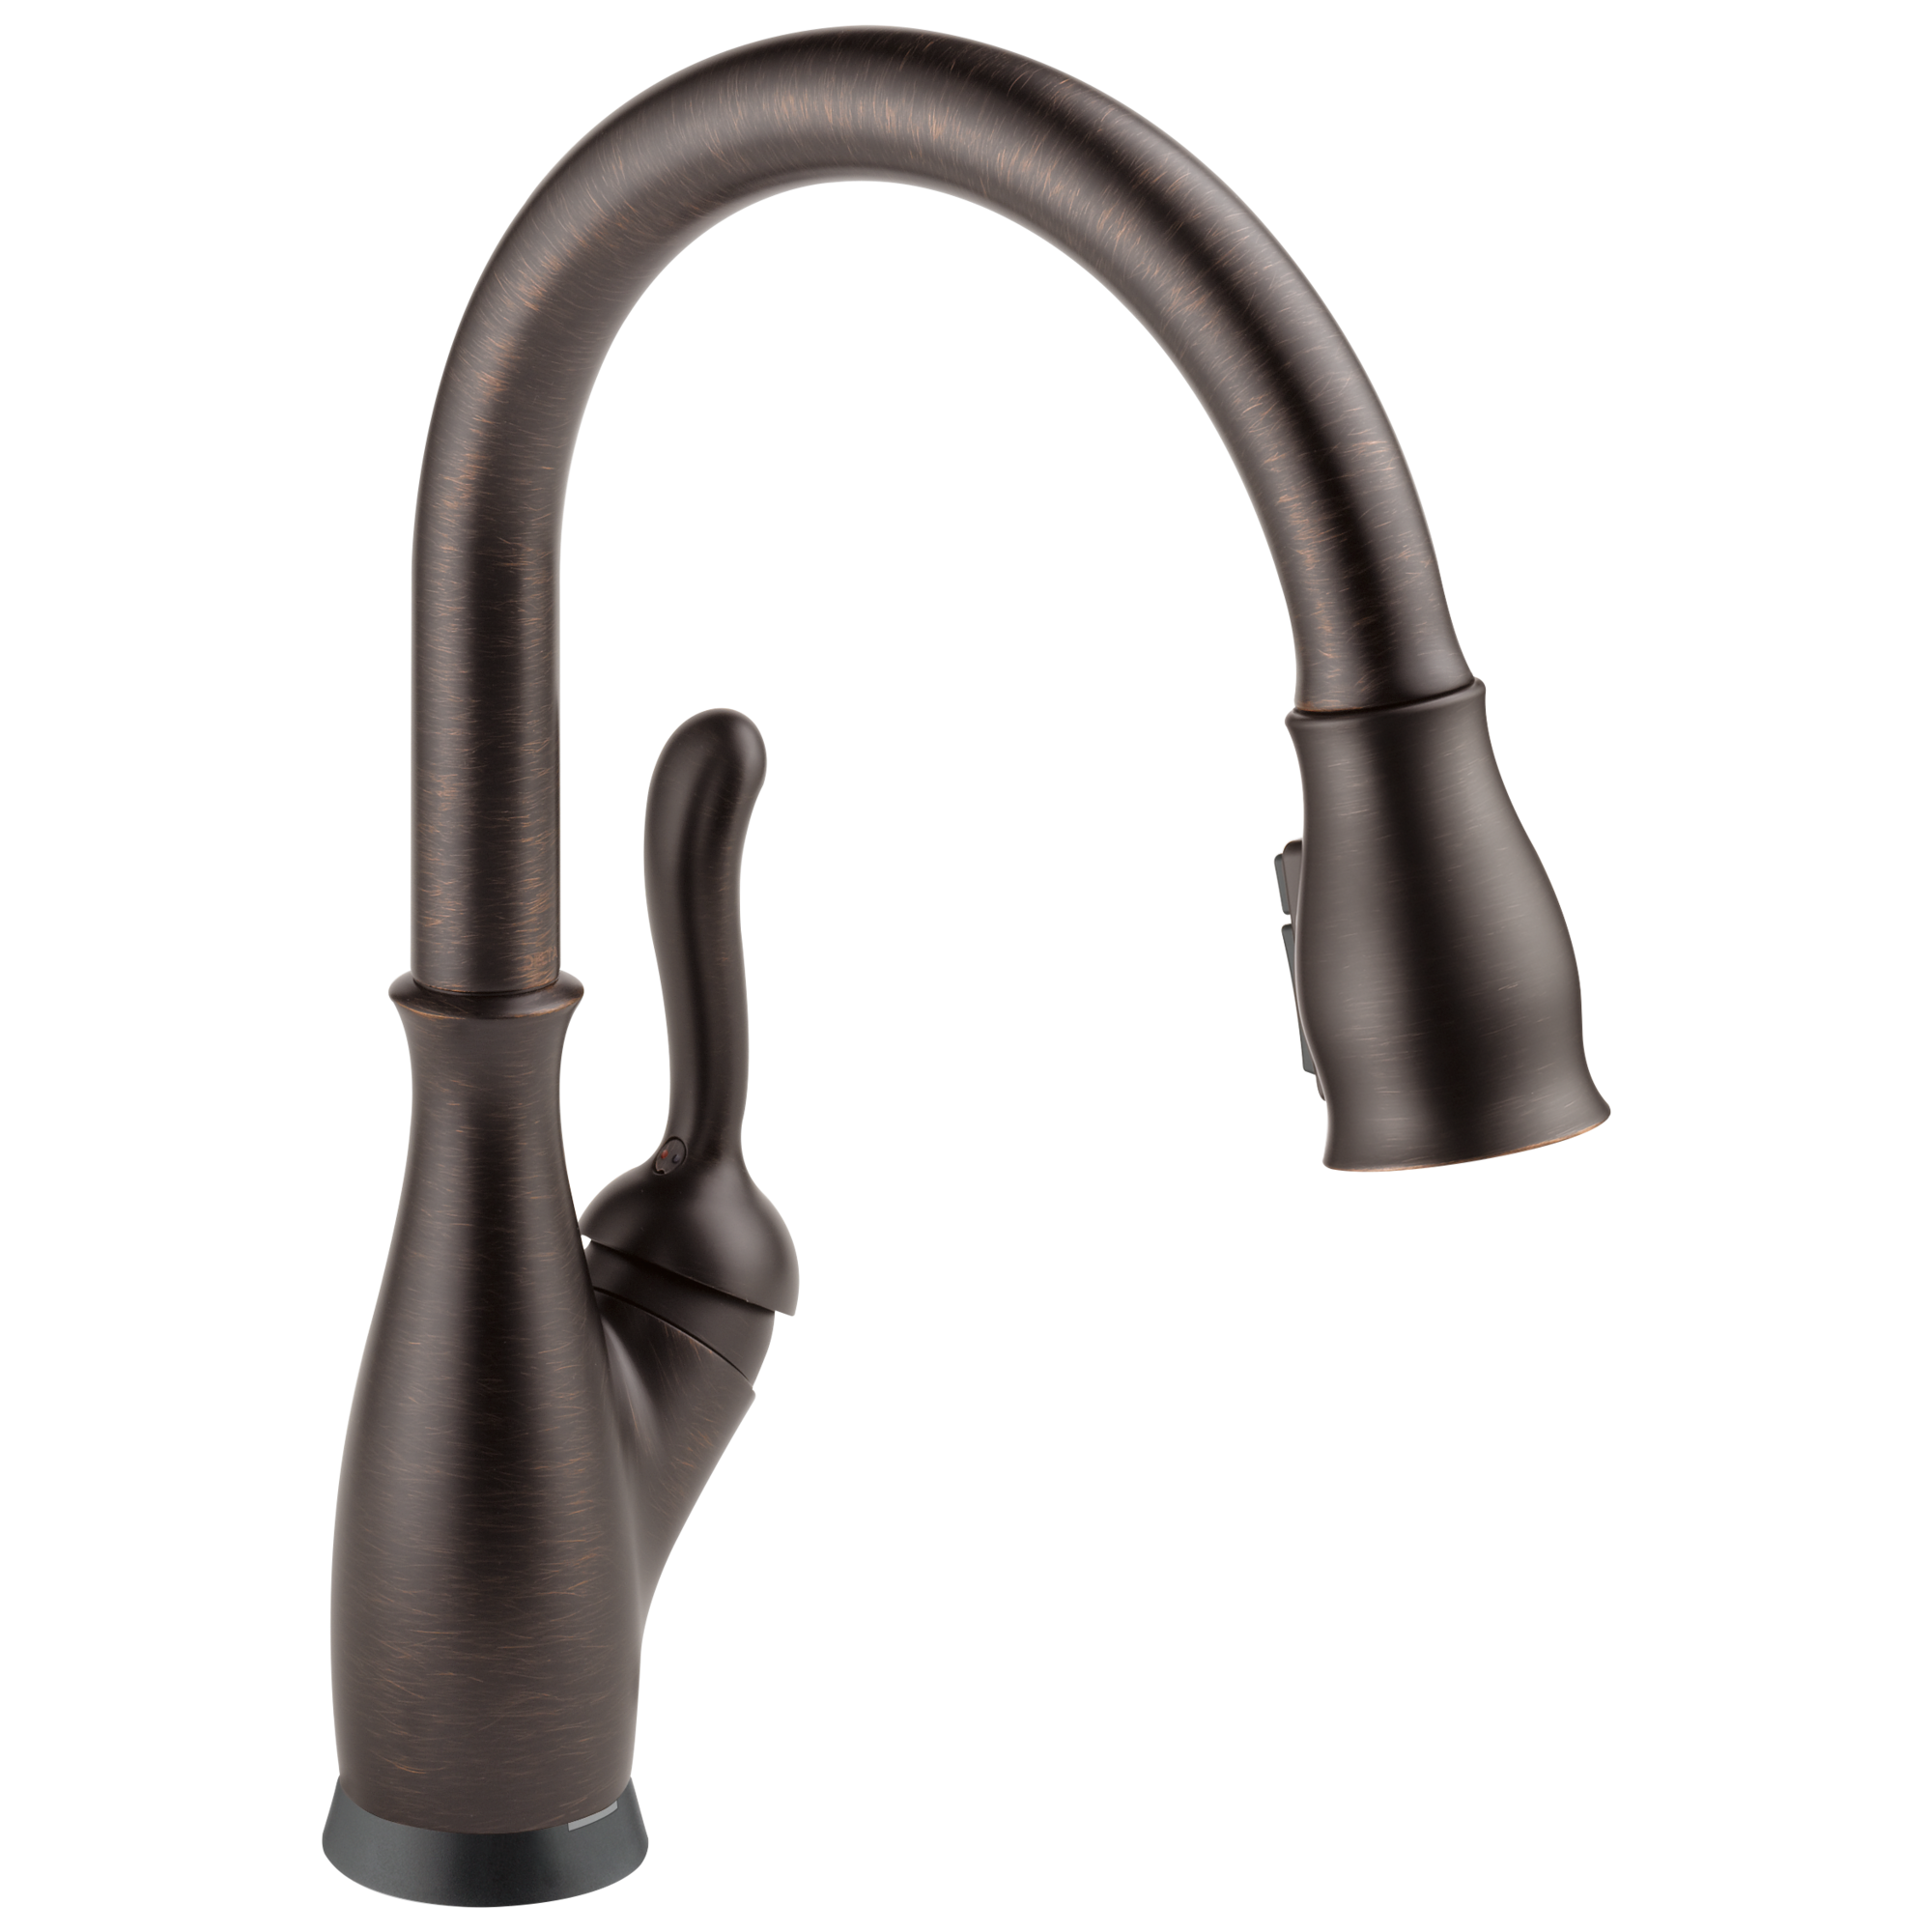 Delta Leland®: Single Handle Pull-Down Kitchen Faucet with Touch<sub>2</sub>O® and ShieldSpray® Technologies